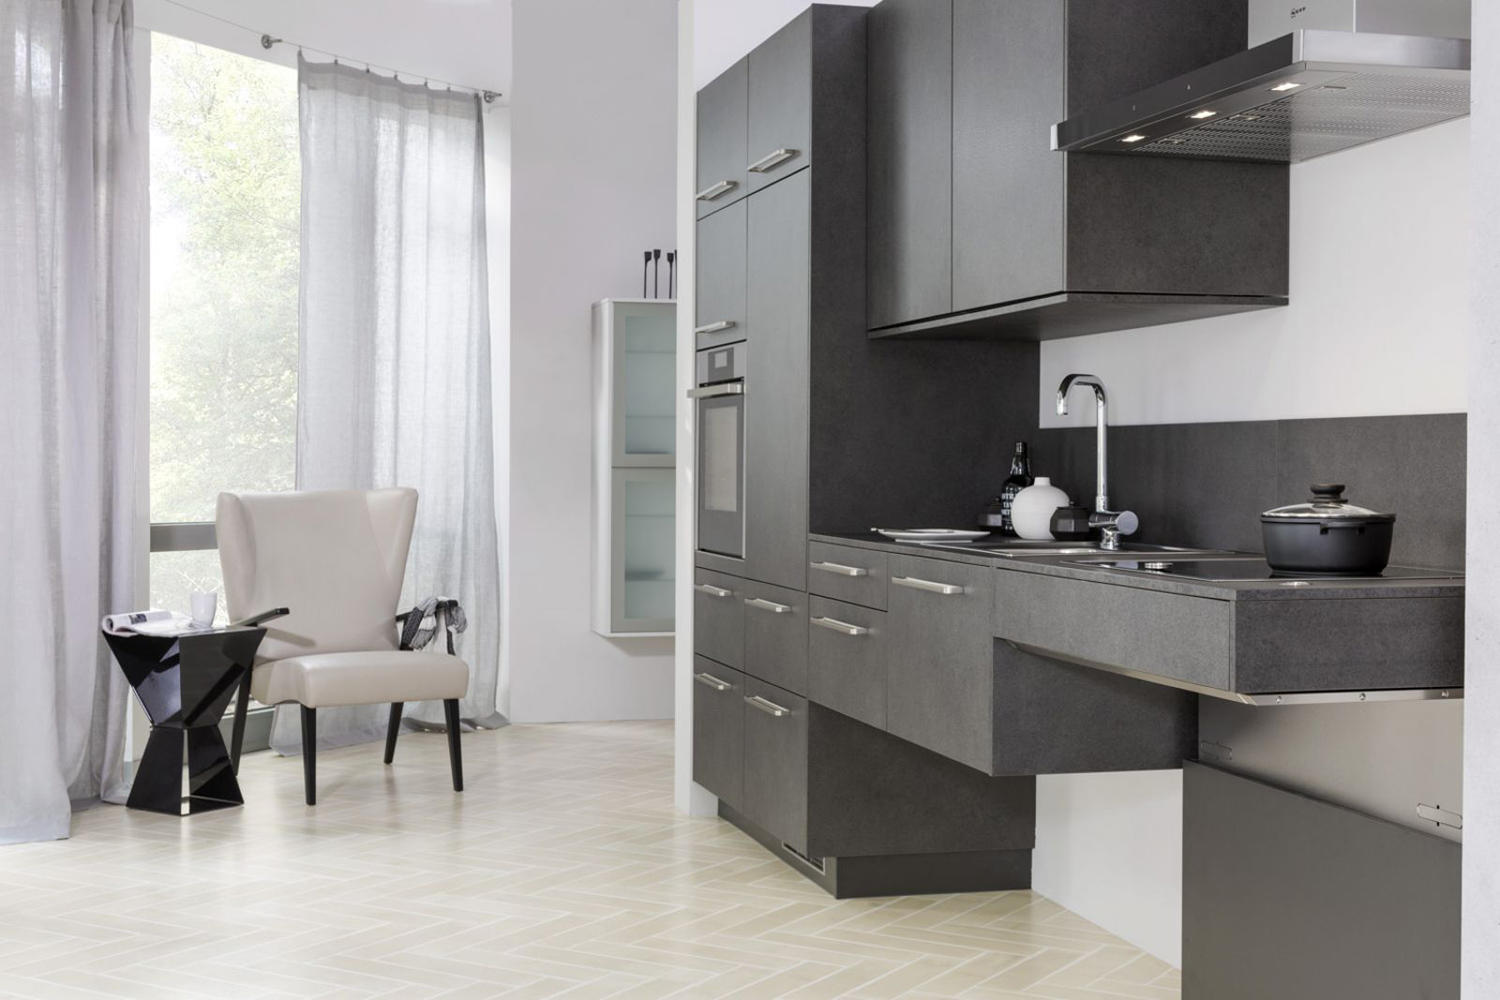 tielsa makes height adjustable counters for kitchens lamina